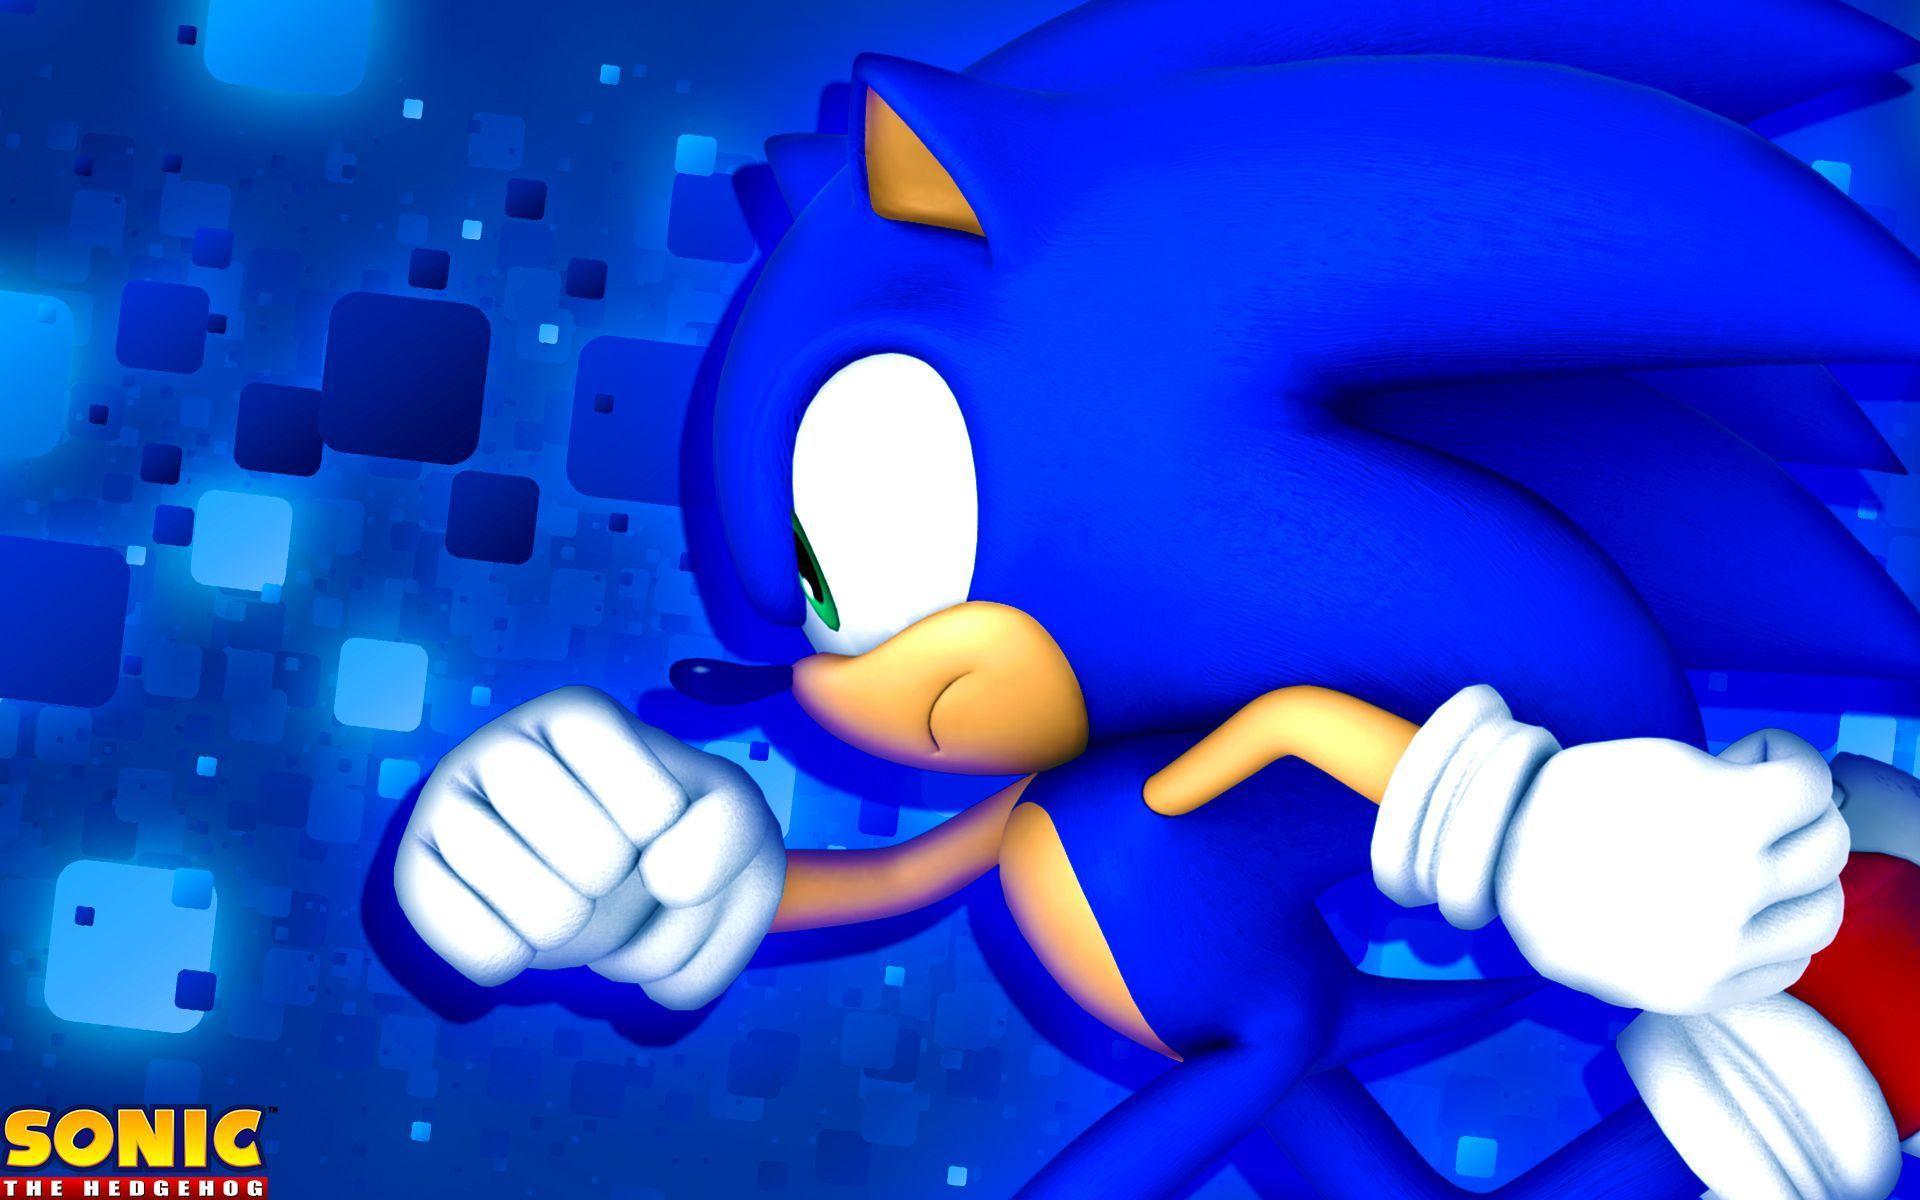 Free Sonic The Hedgehog Background Download. Wallpaper